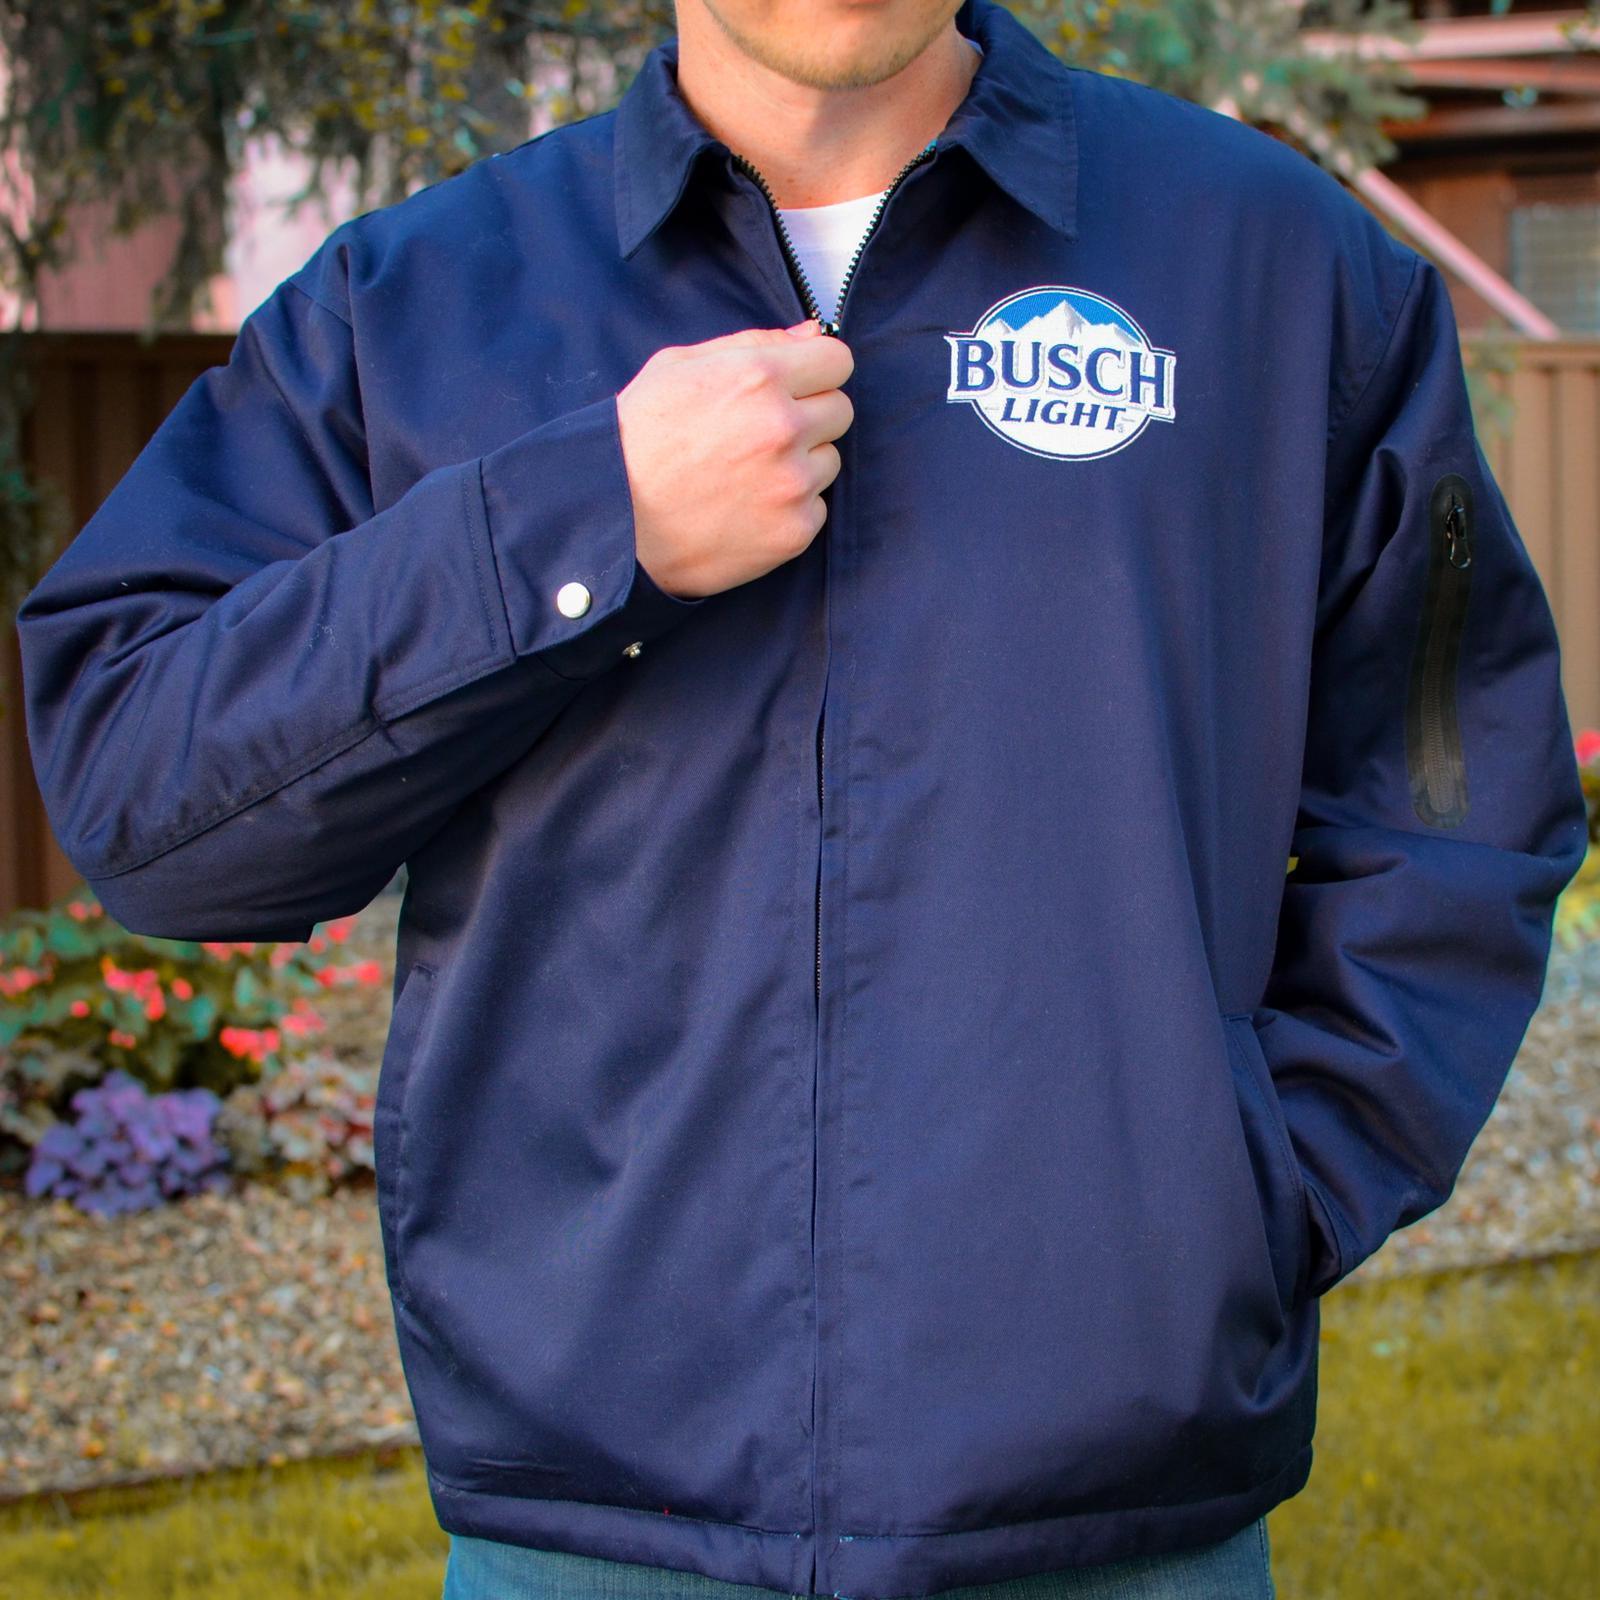 Lifestyle of navy jacket with a zipper pocket on the left arm